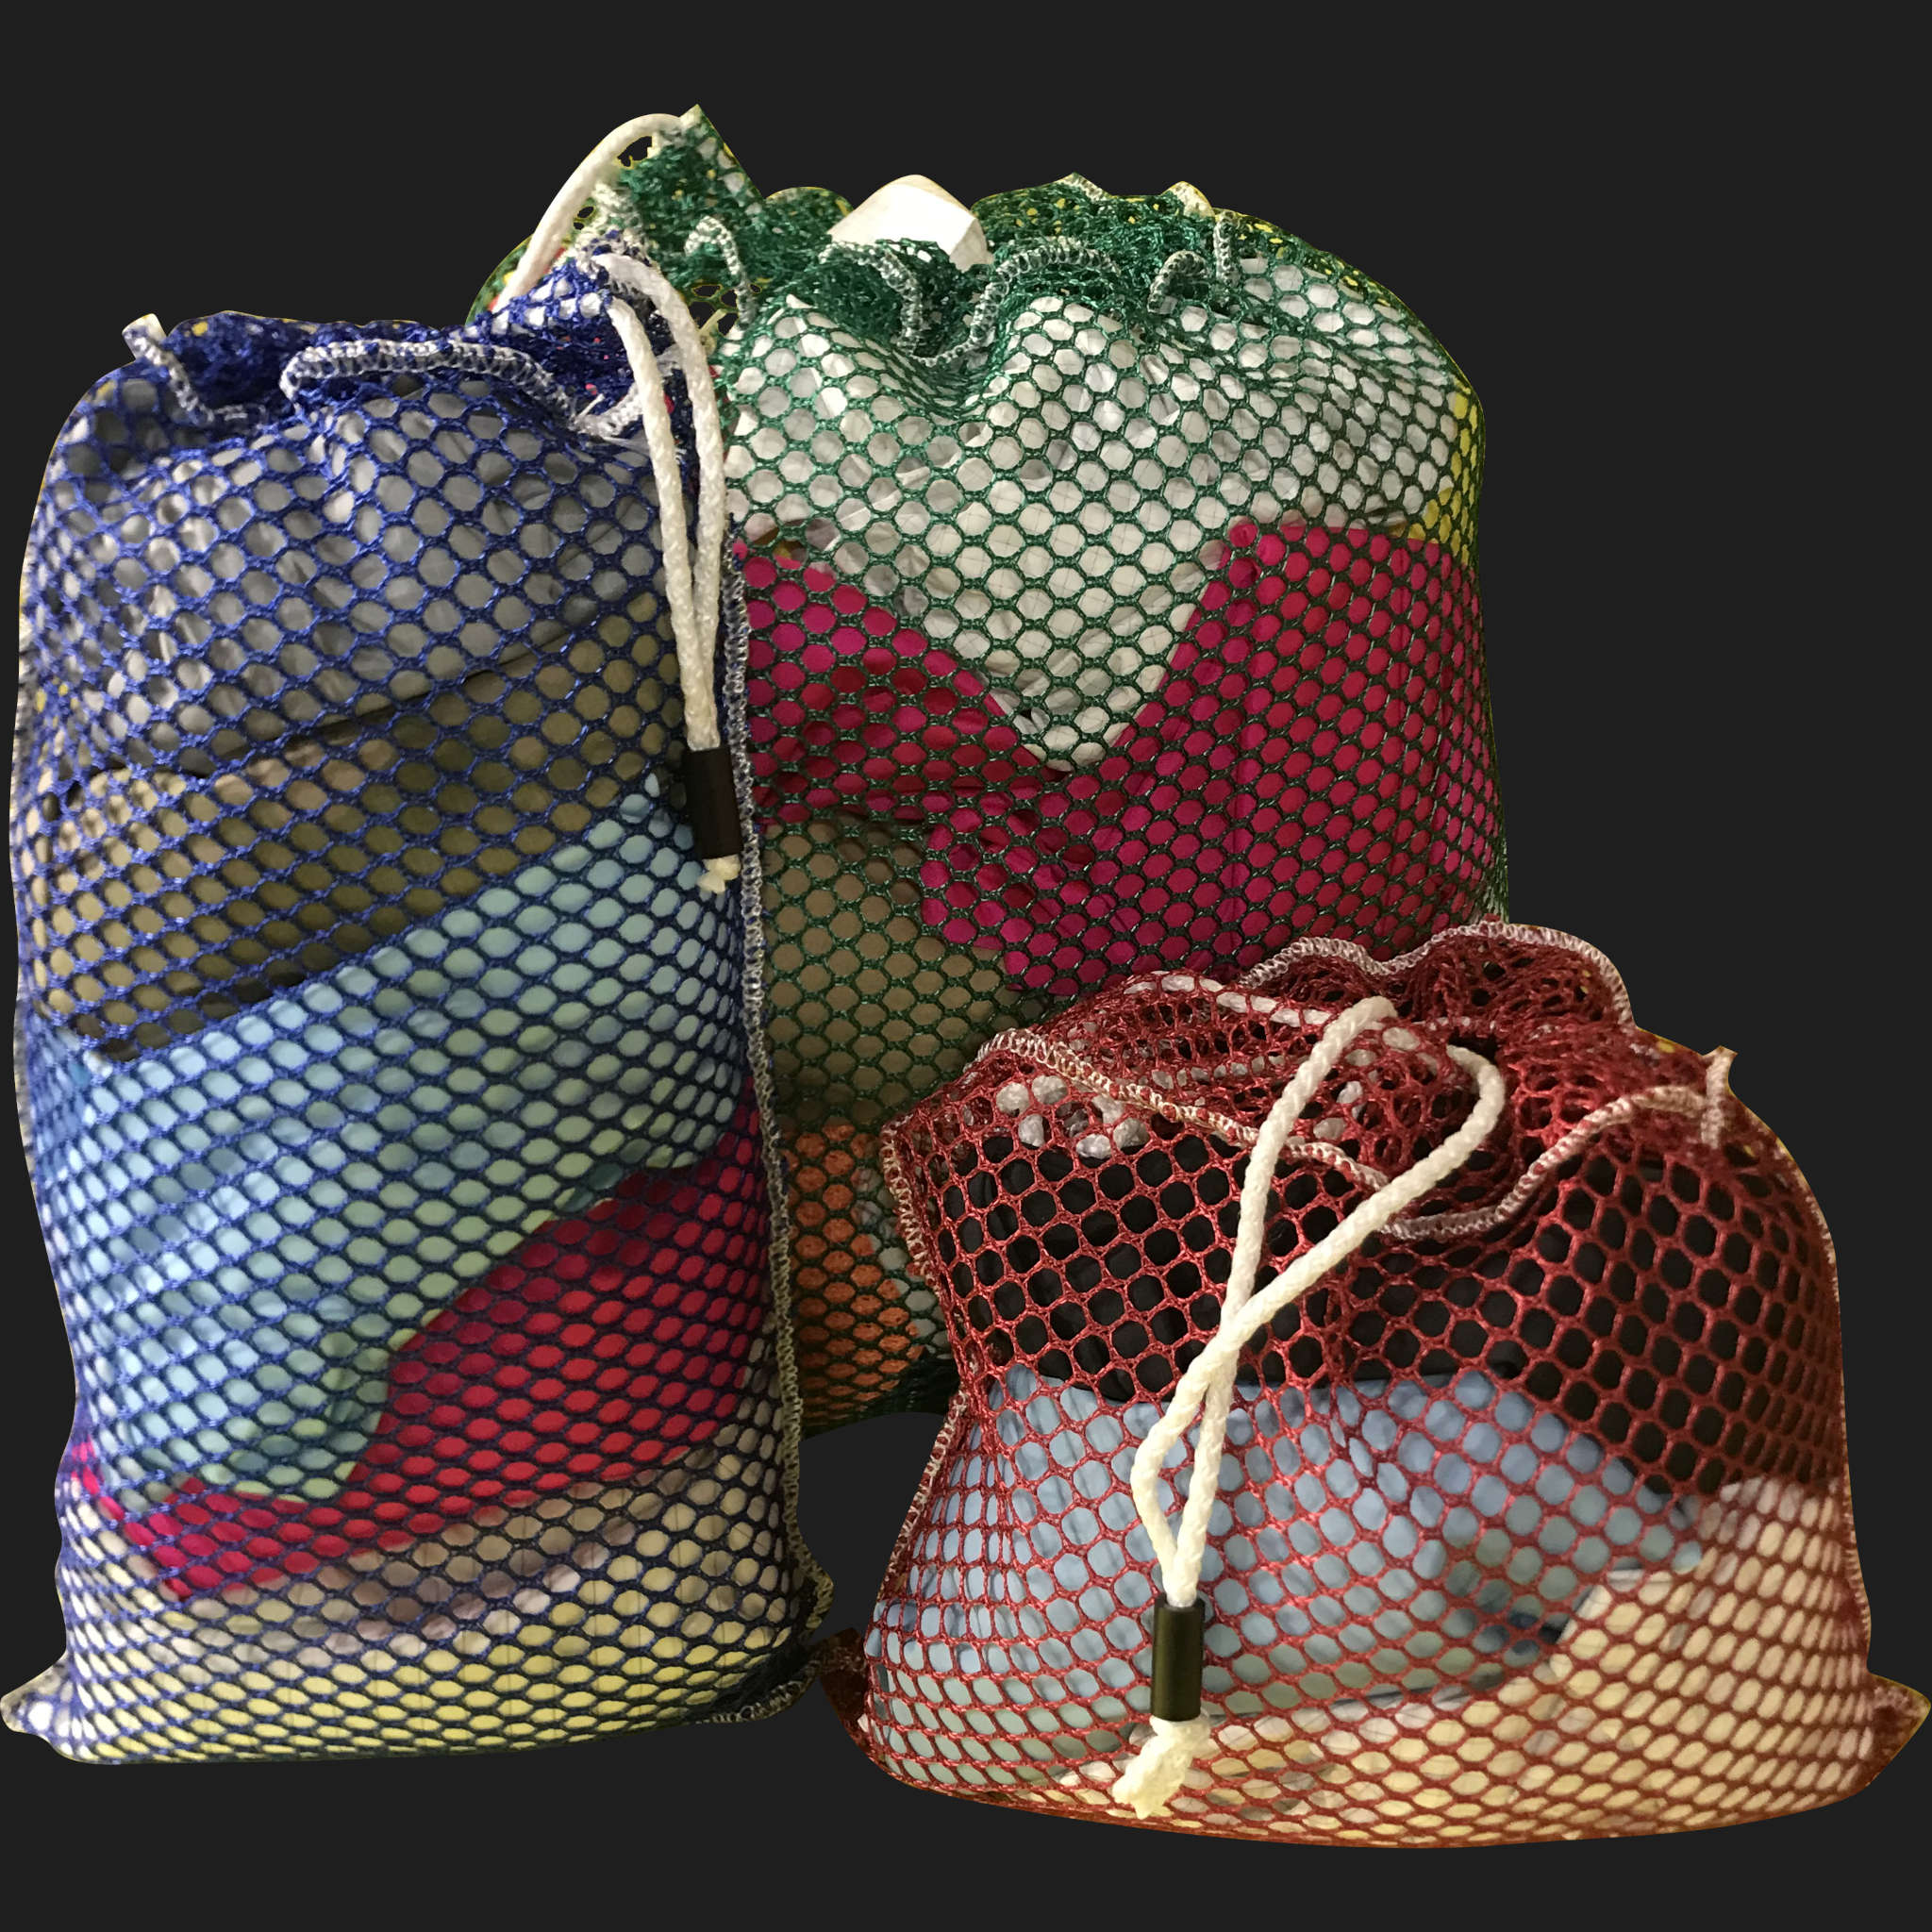 44" x 48" Customized Mesh-Net-Laundry Bags Heavy Duty with Cord and barrellock closure